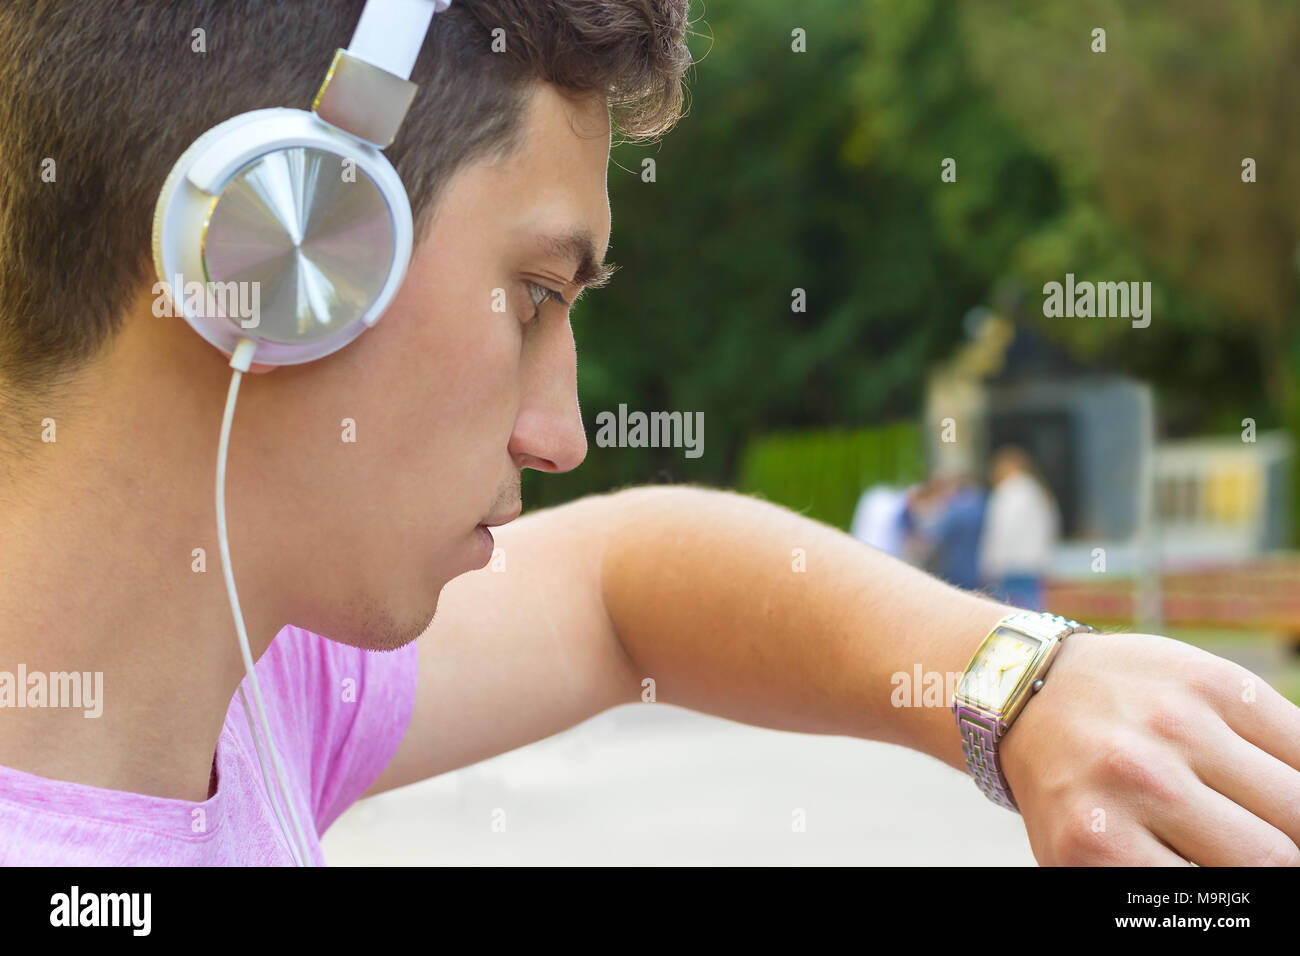 young men looking on a wrist watch and wearing a headphones Stock Photo